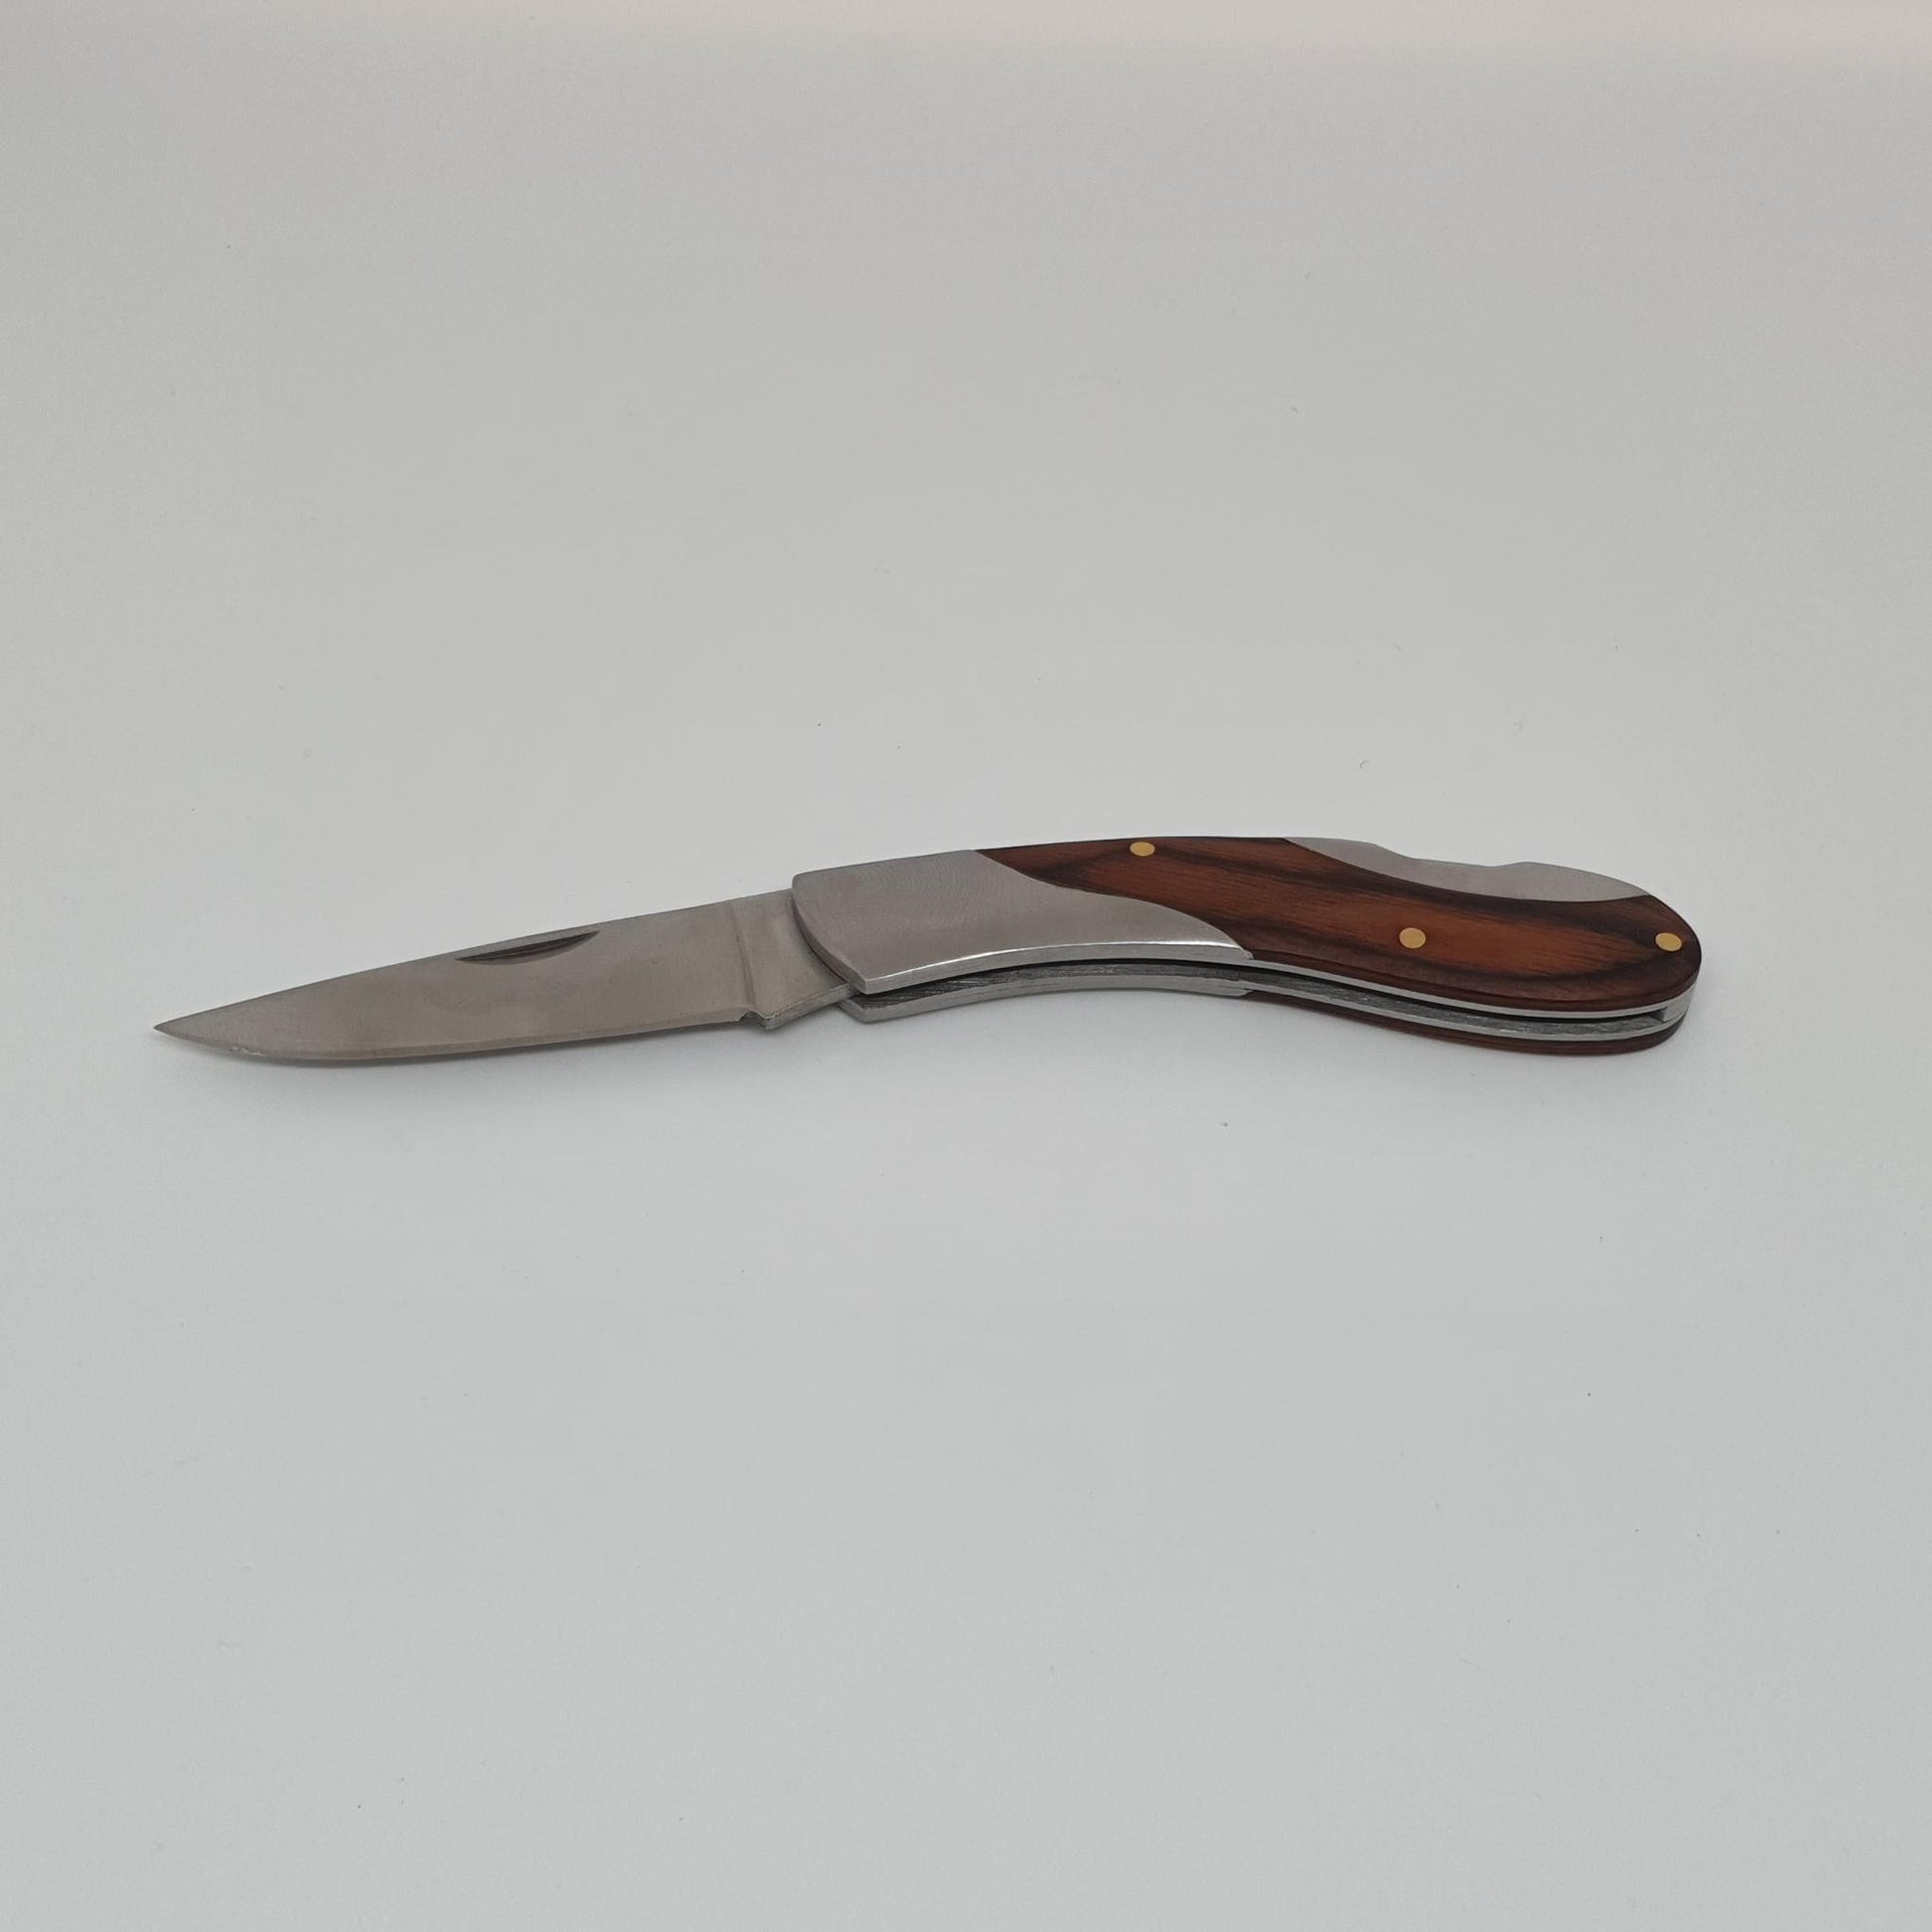 Stainless steel folding blade Stainless steel handle with wood inlay